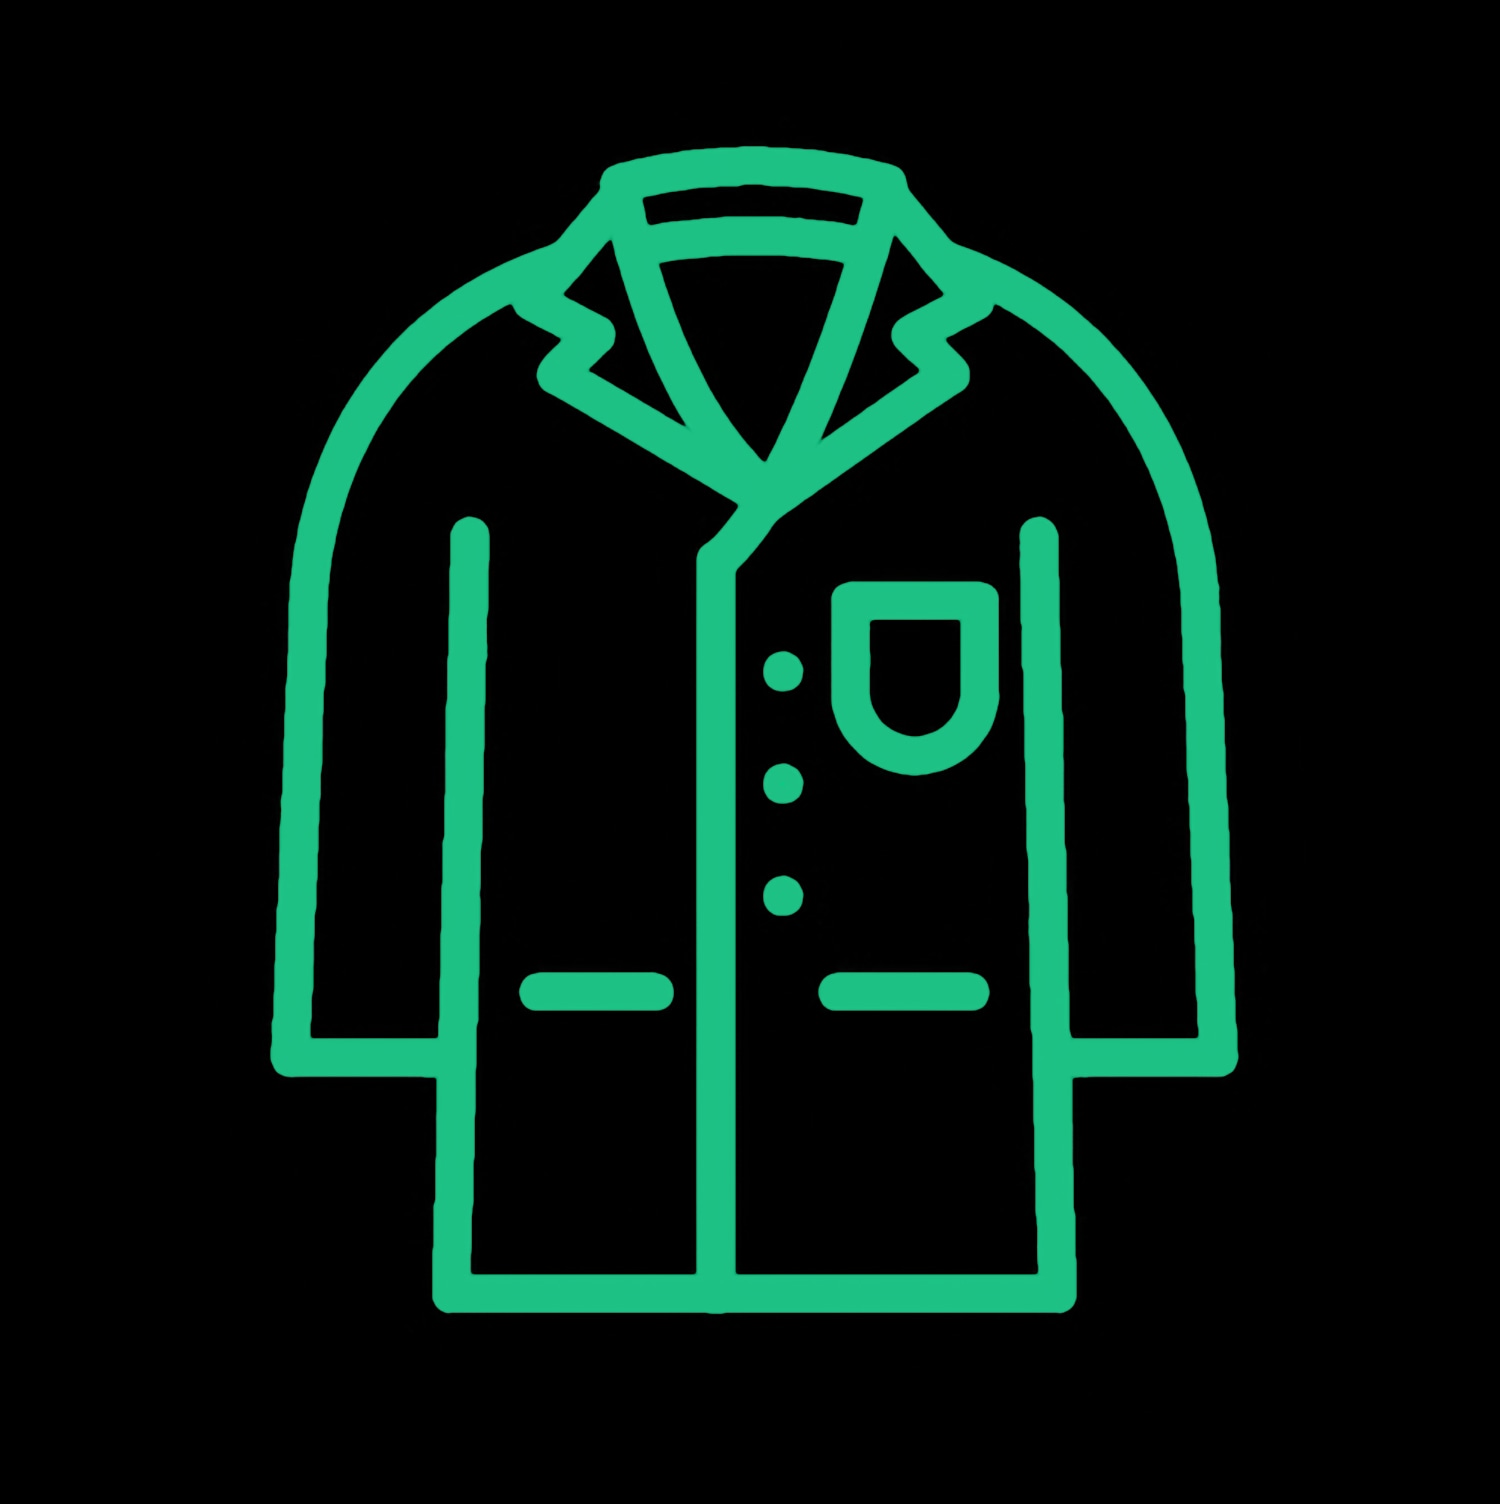 An illustration of a lab coat